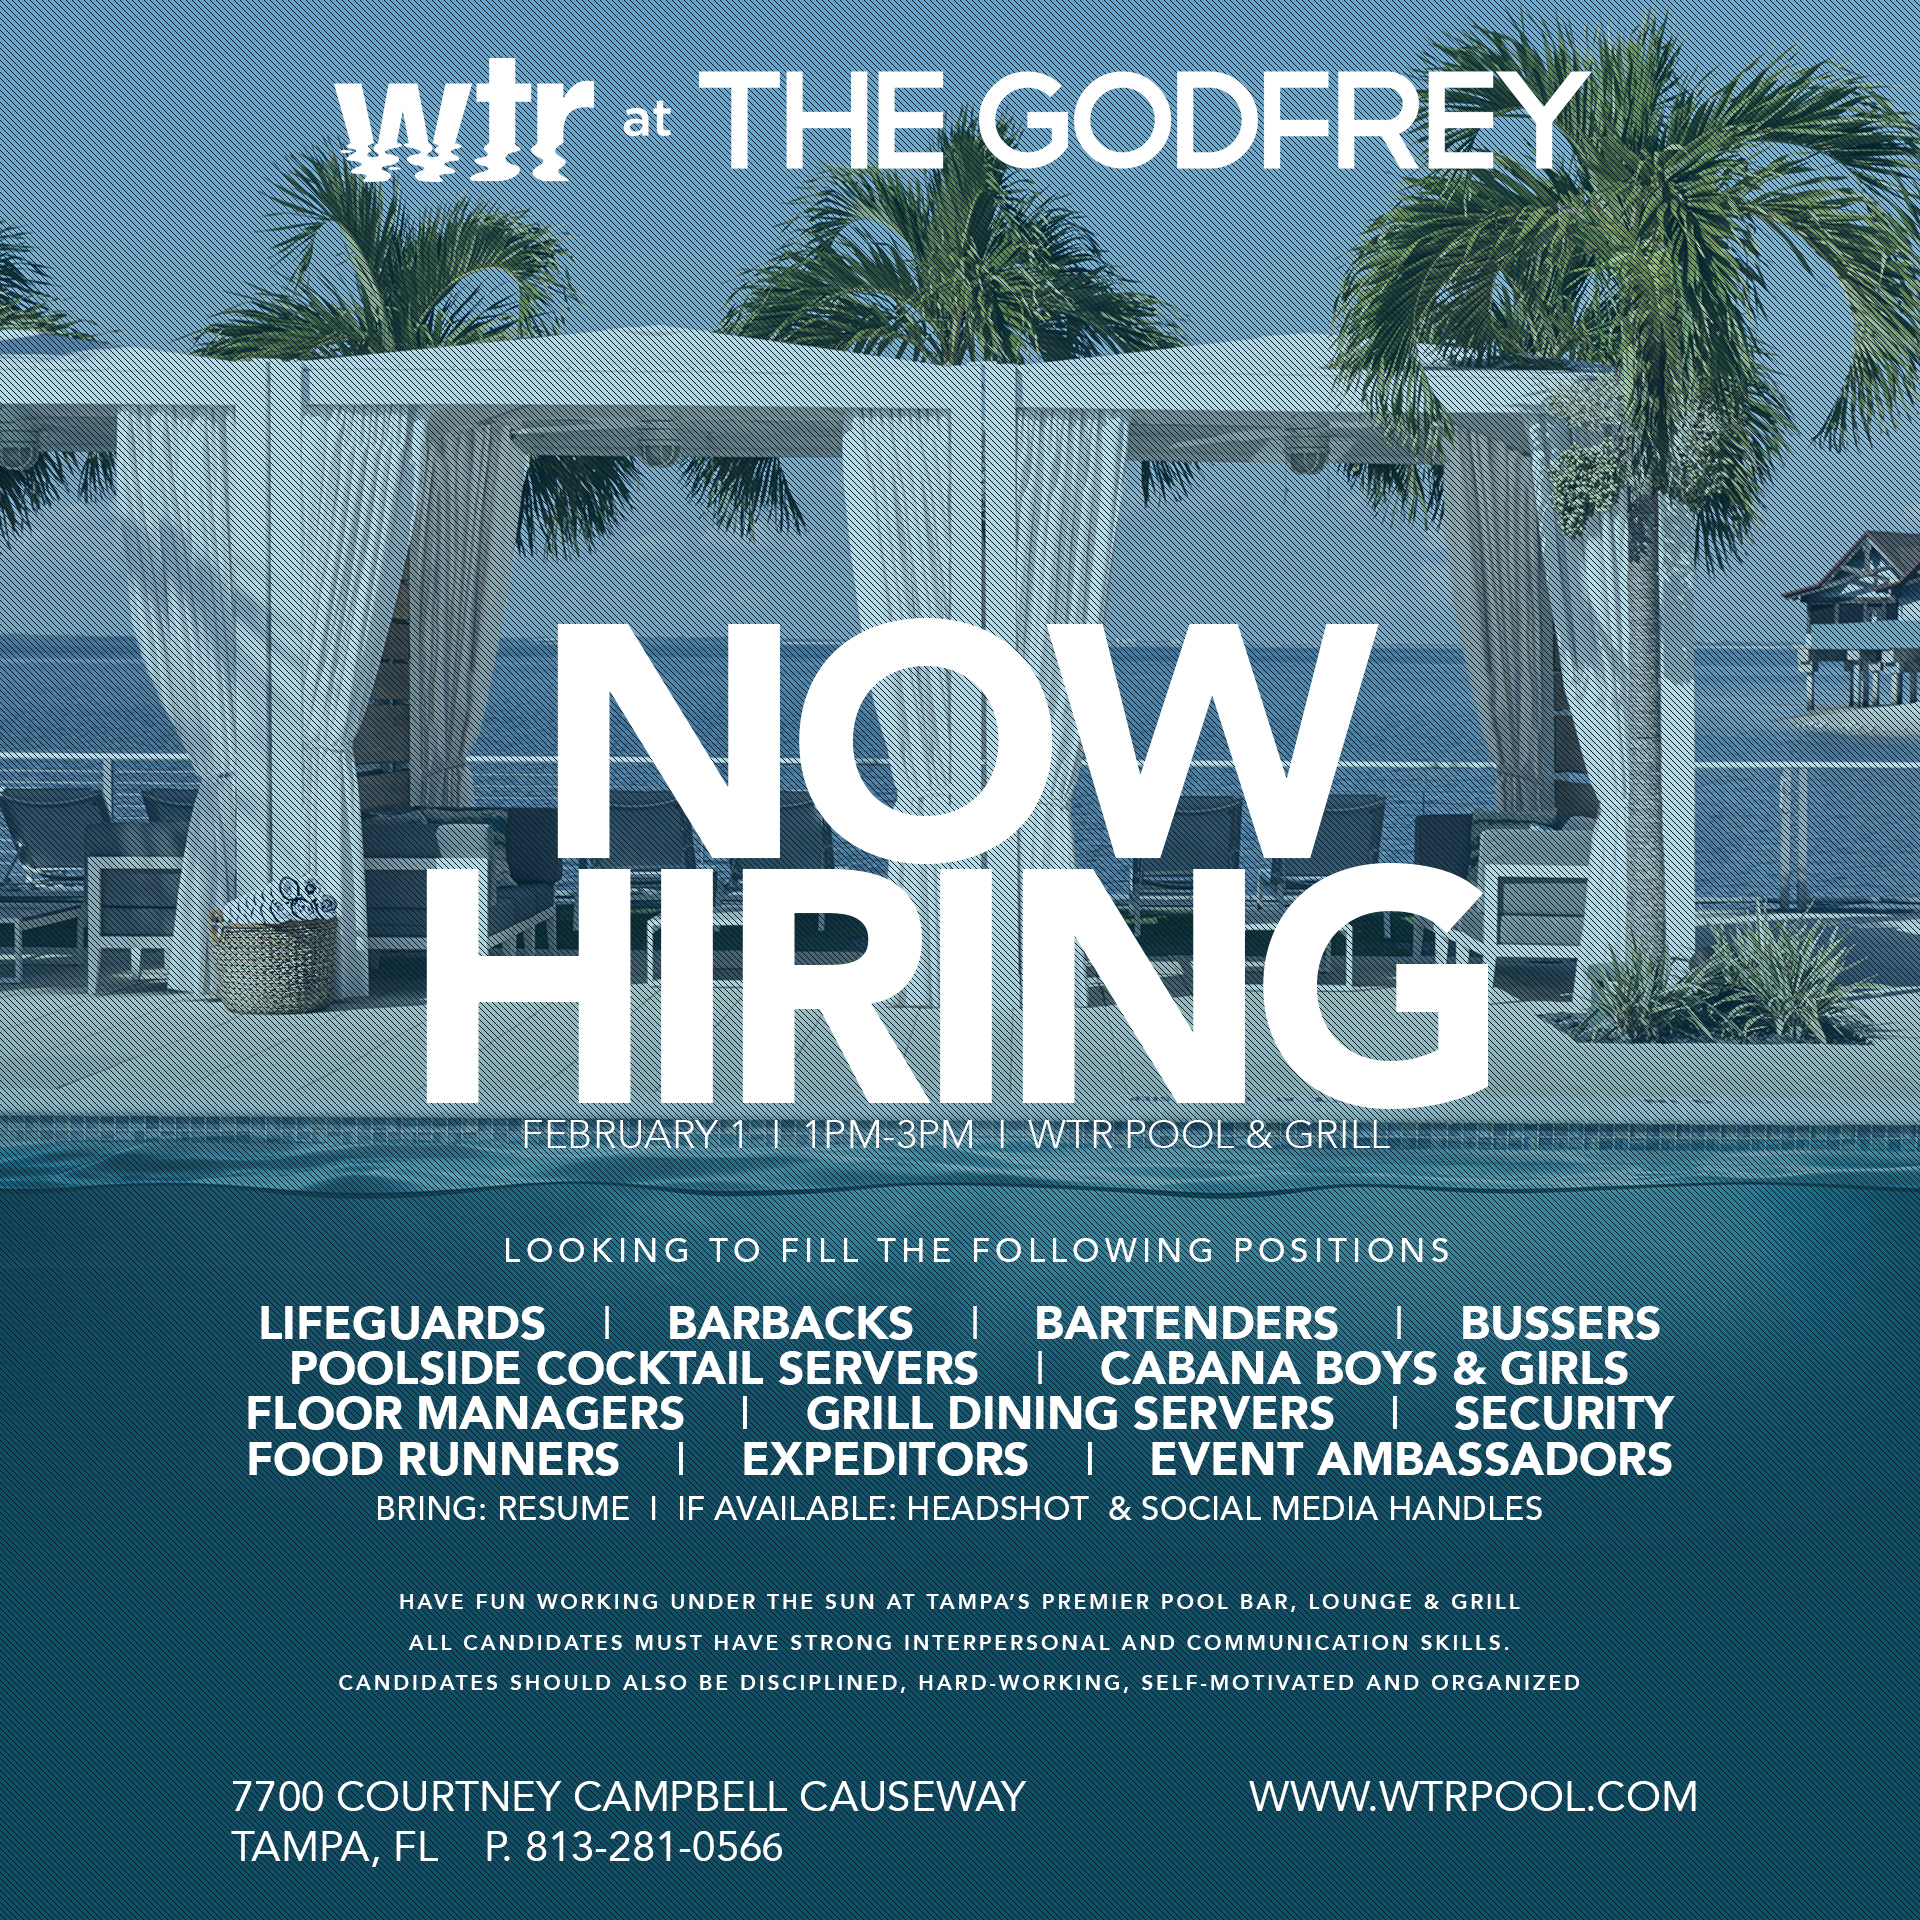 Client News: The Godfrey Hotel & Cabanas to Hire 60+ Positions this February